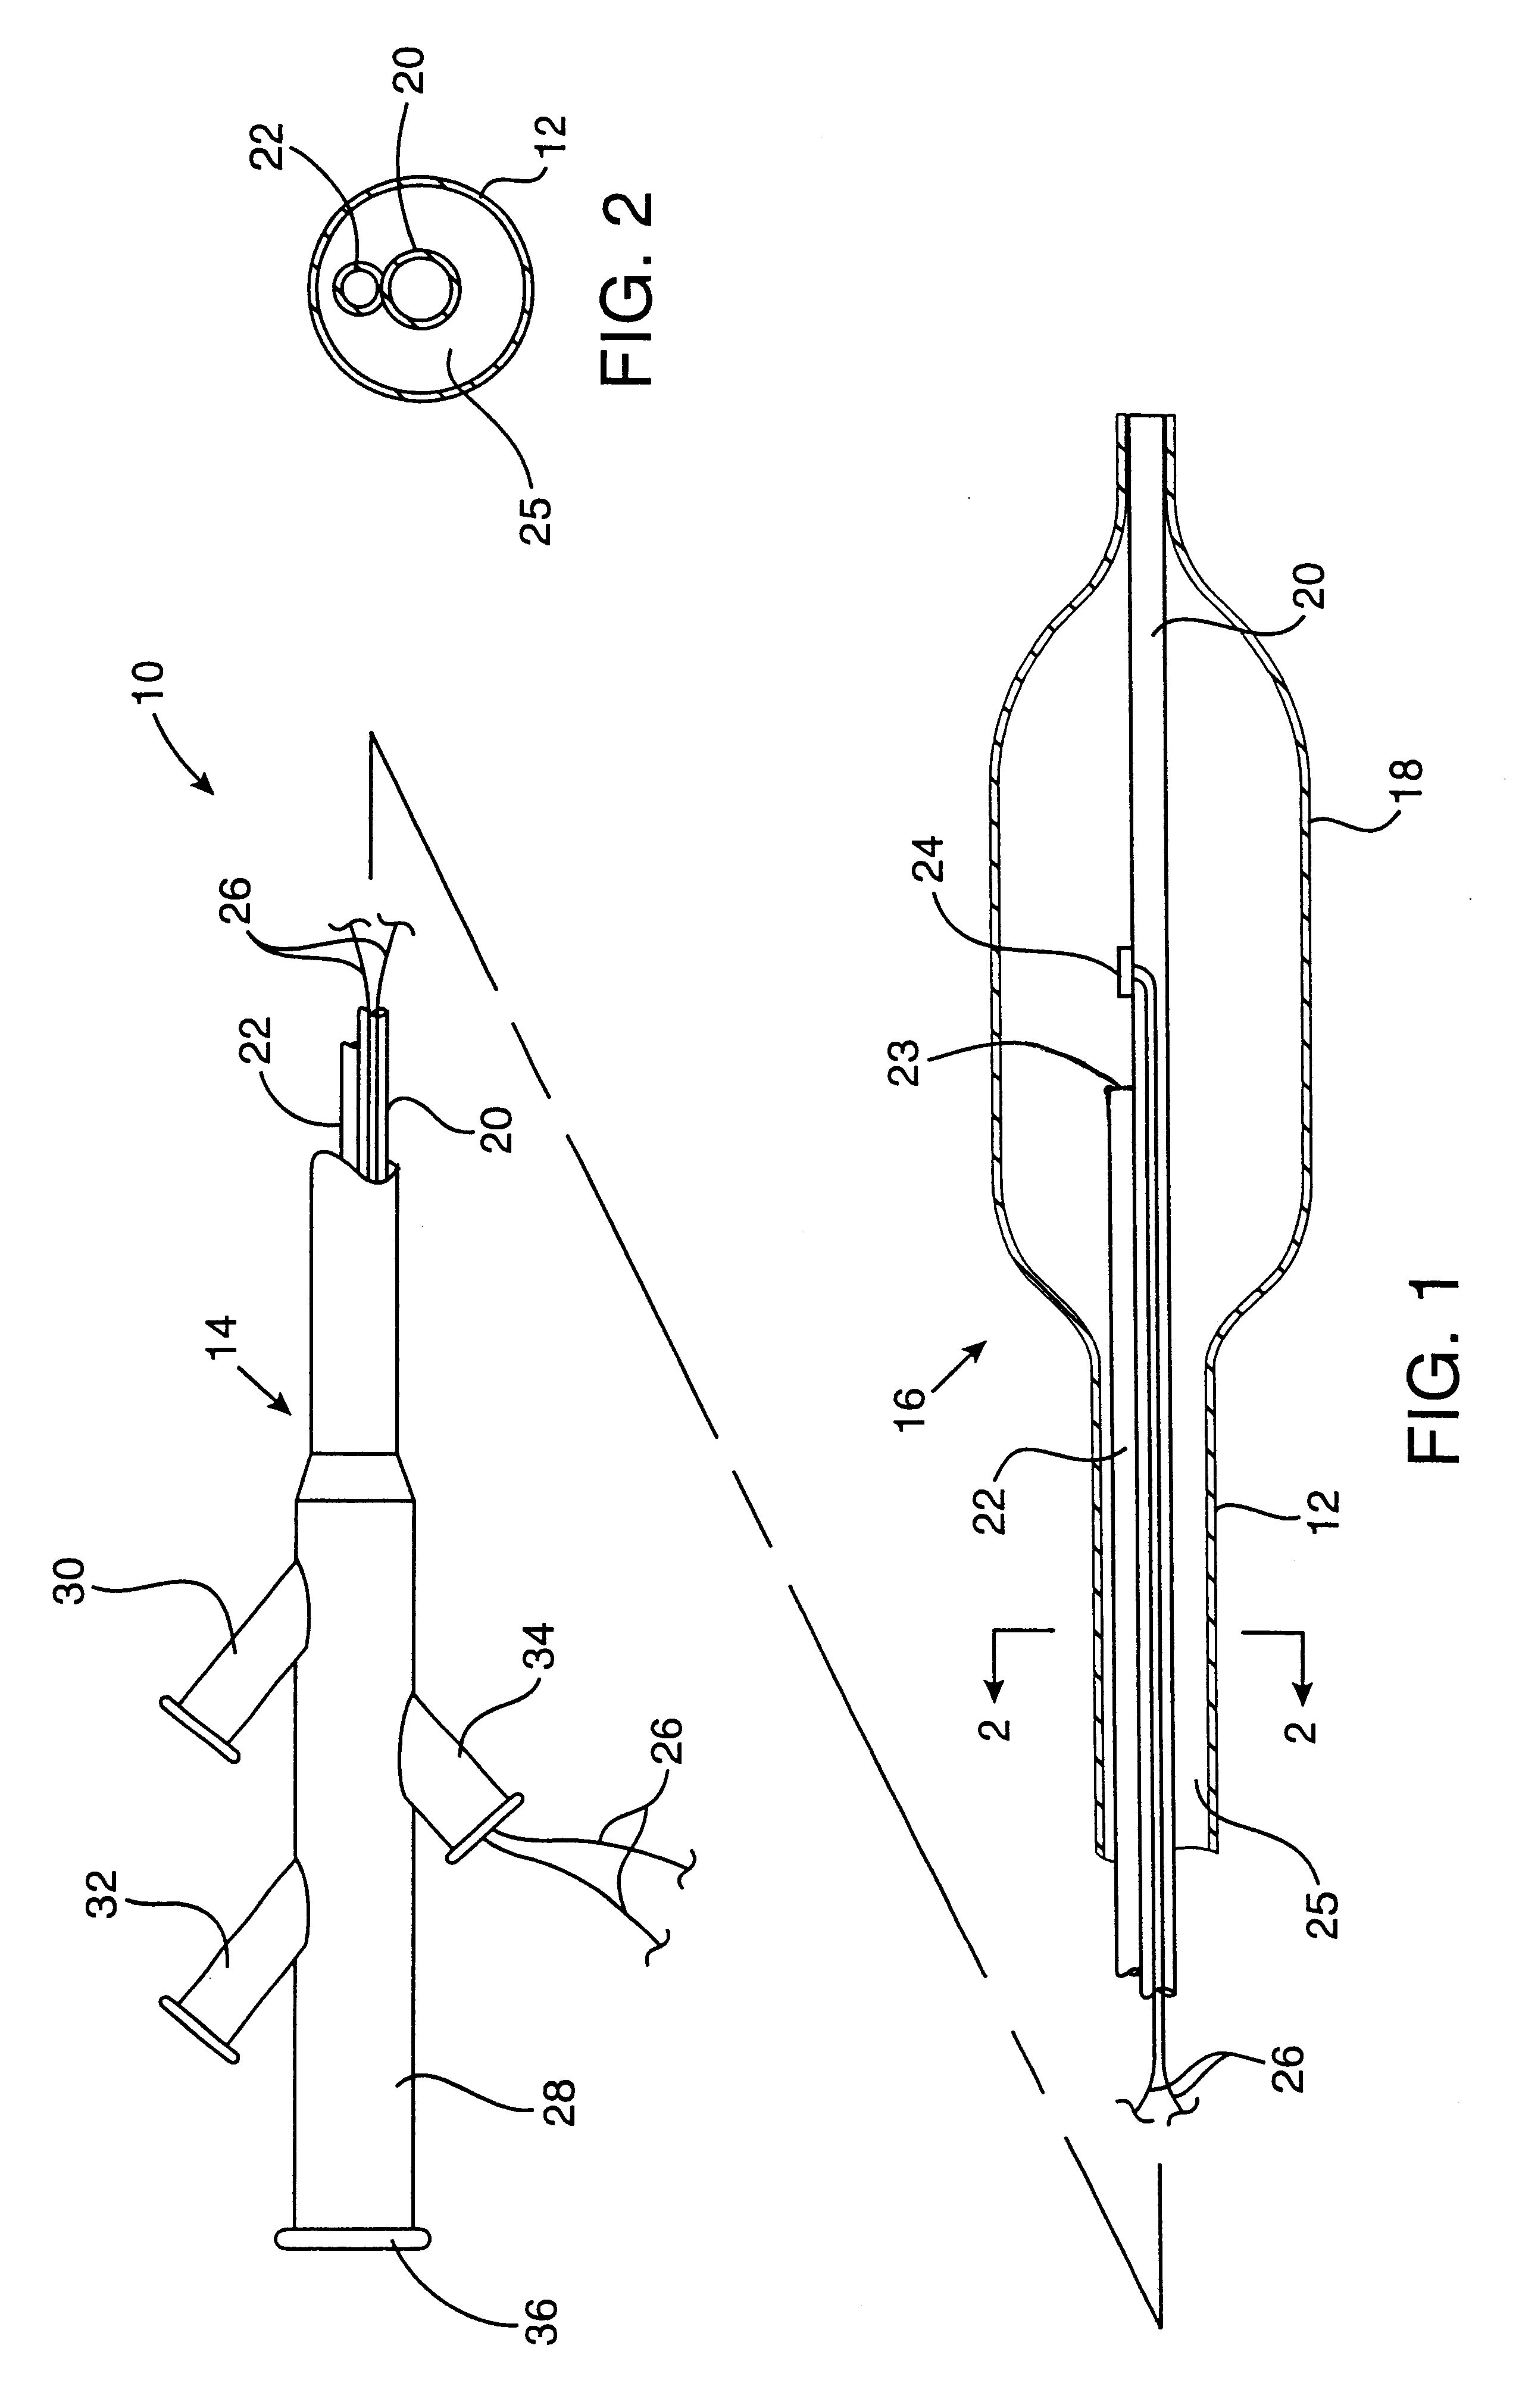 Apparatus and method for cryogenic inhibition of hyperplasia